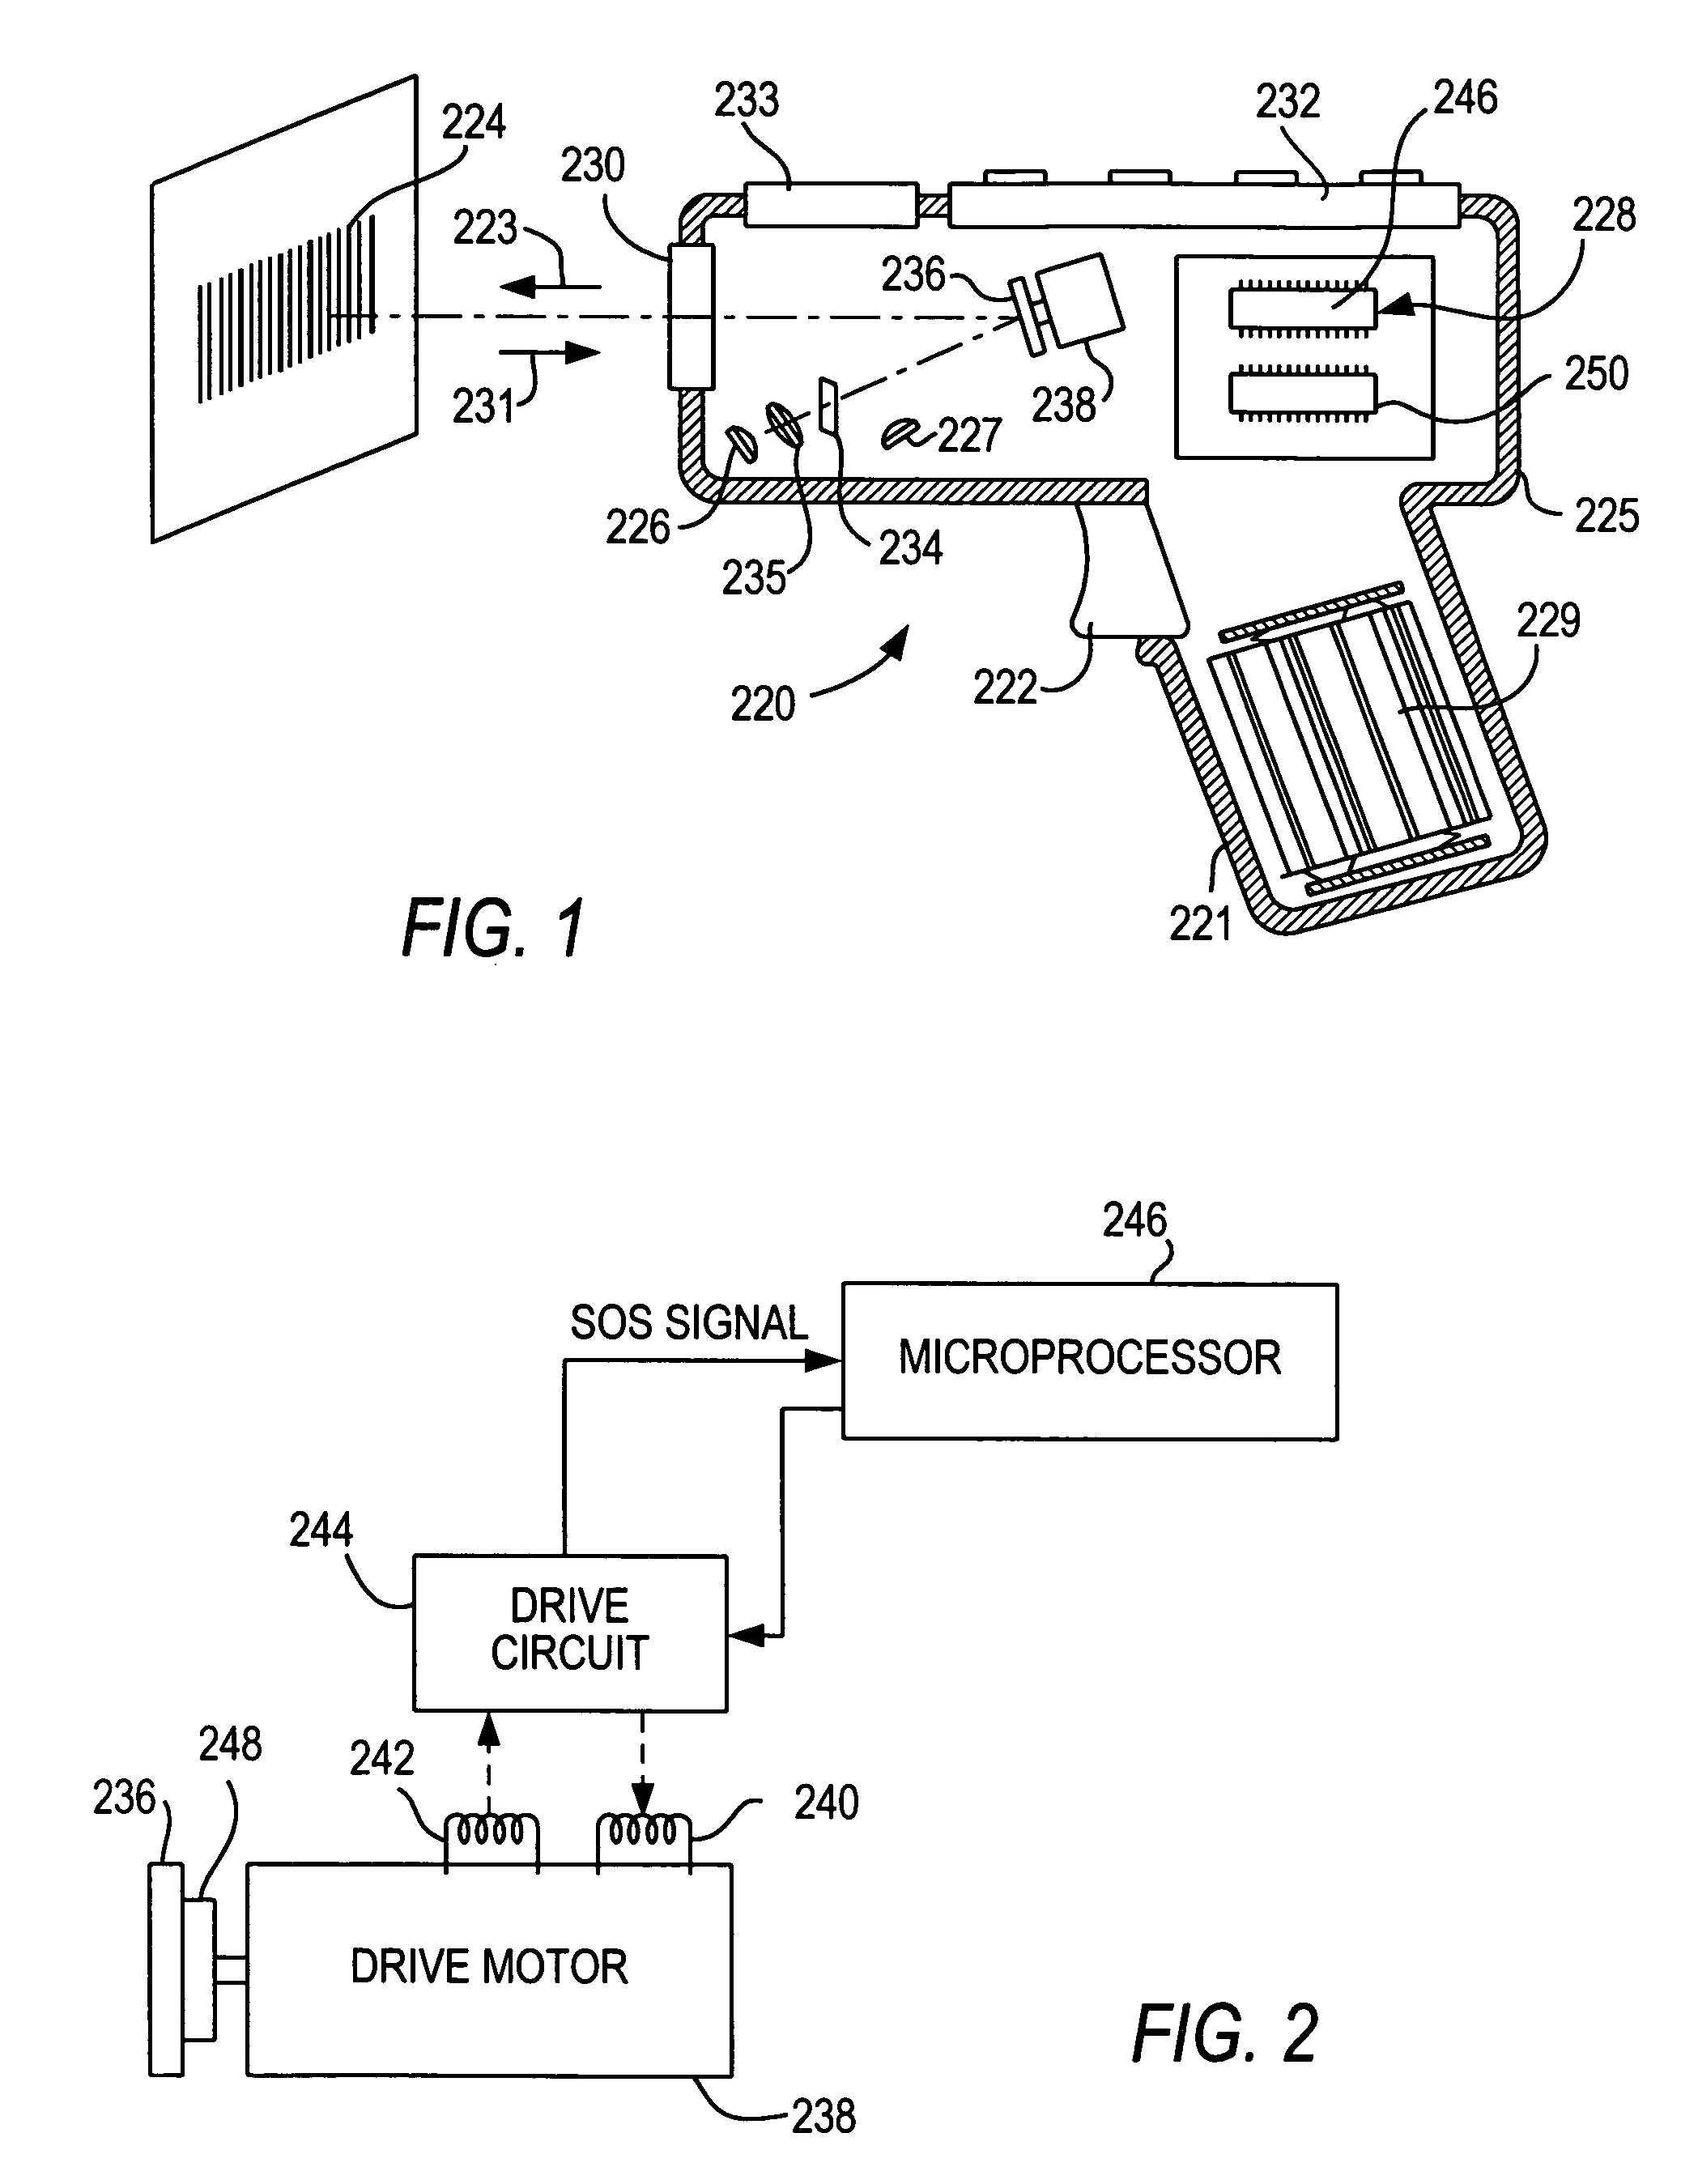 Motor drive circuit with reduced coil crosstalk in a feedback signal indicative of mirror motion in light scanning arrangements